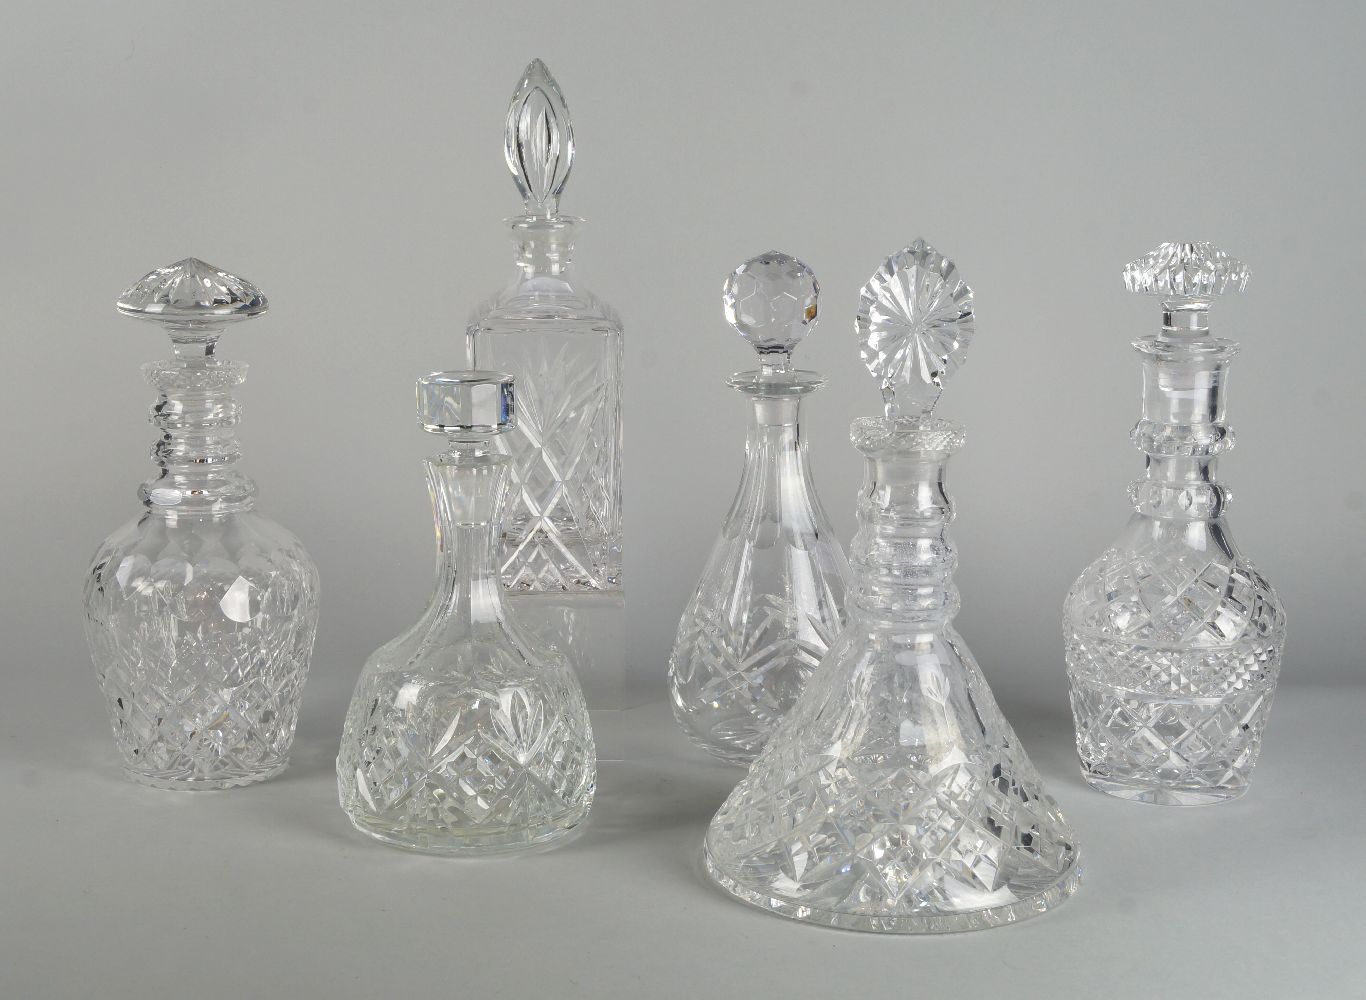 A Captains style glass decanter, 20th century, with a conical base and ring moulded neck, 20th